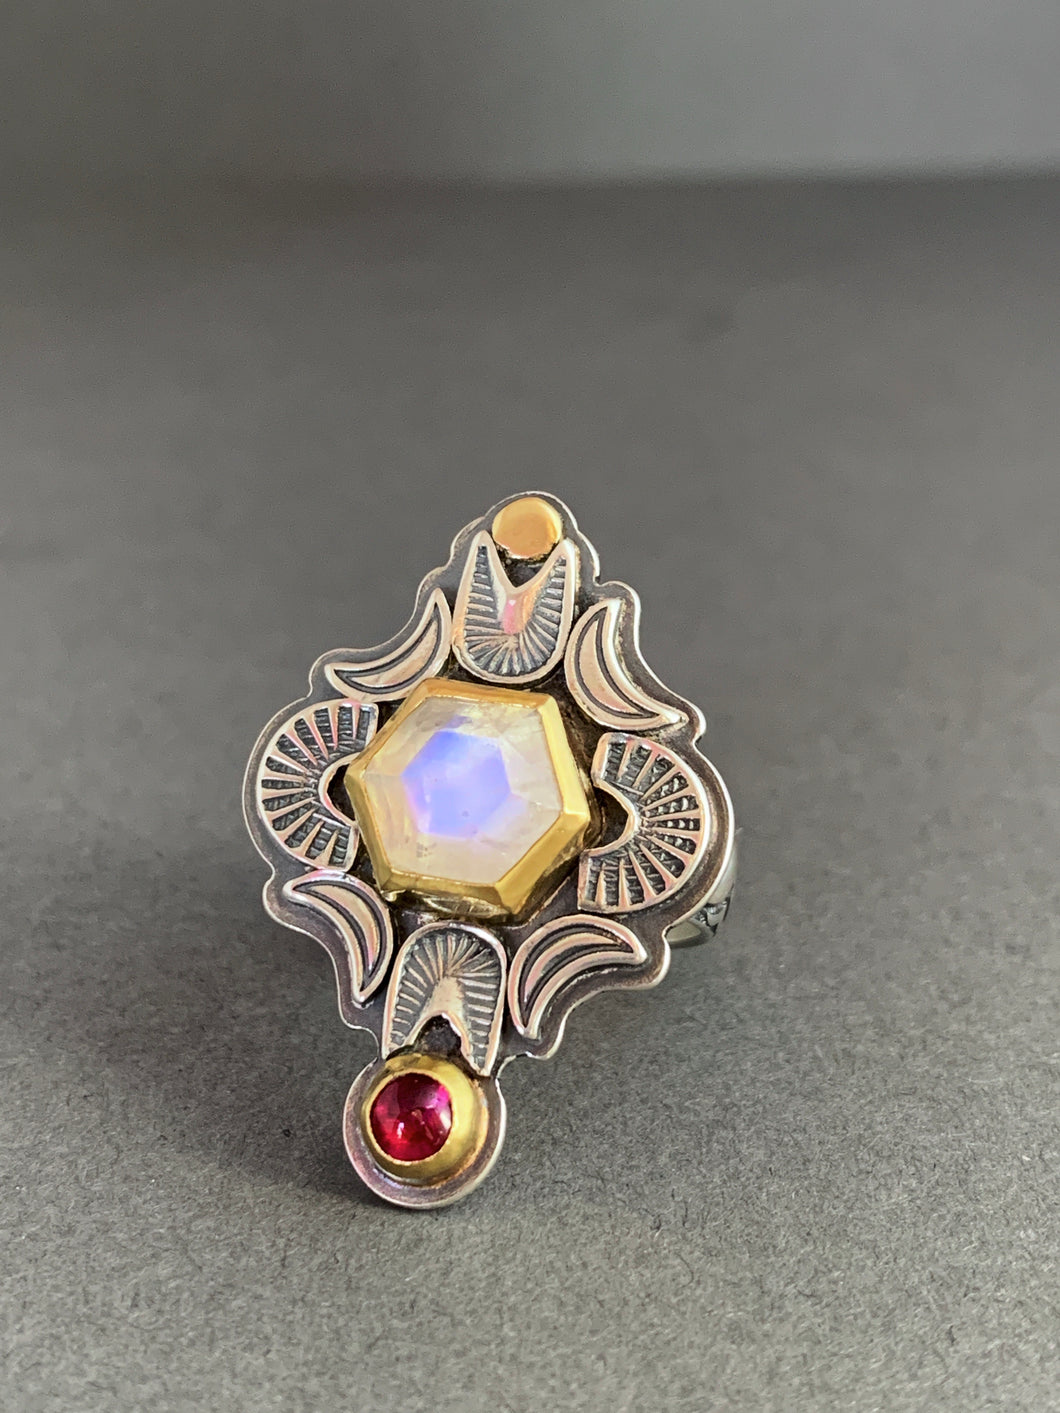 Moonstone and tourmaline ring set in 22k gold